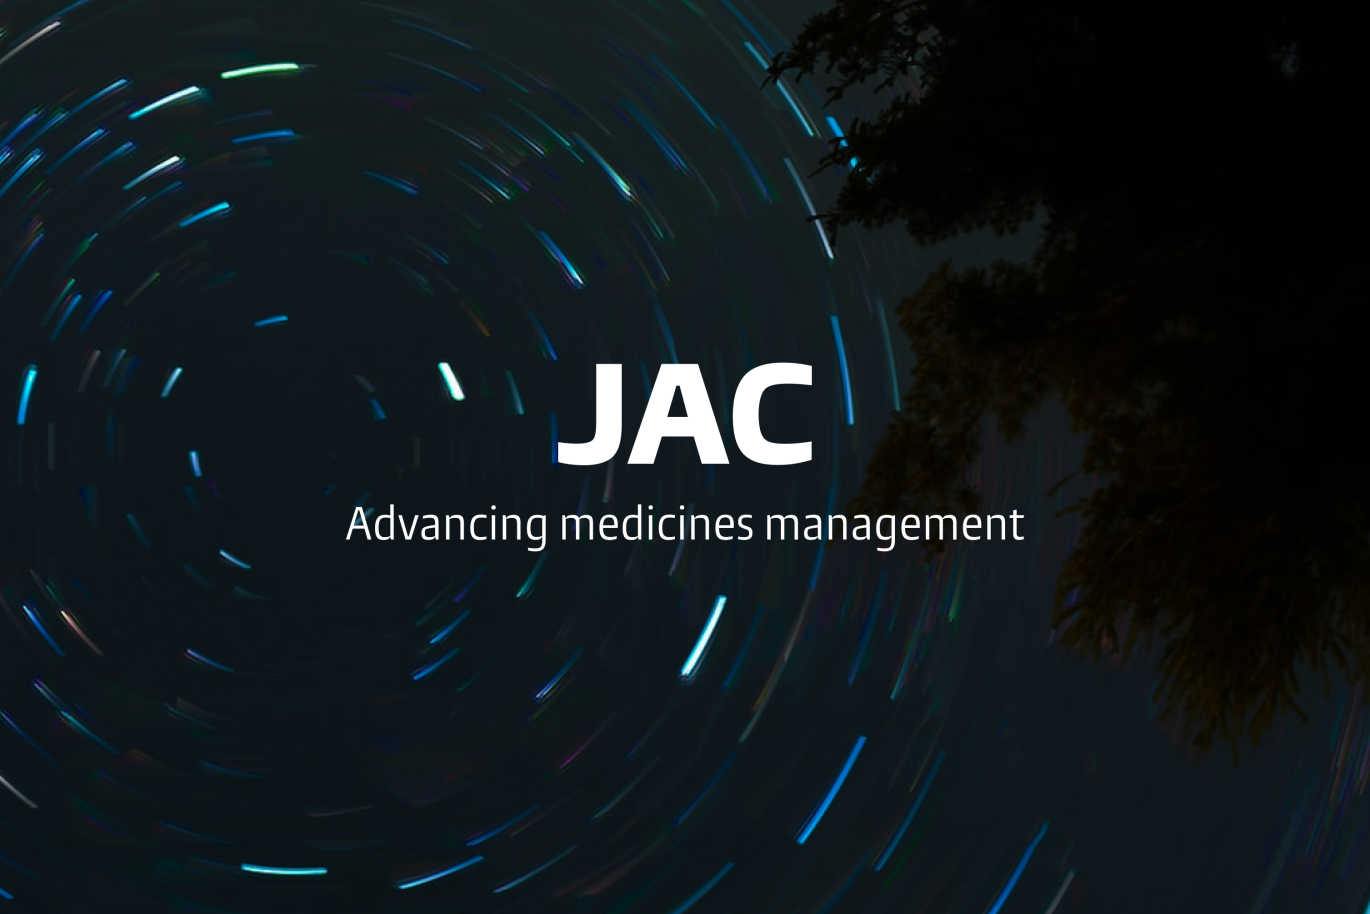 Digital repositioning for the leading medicines management company